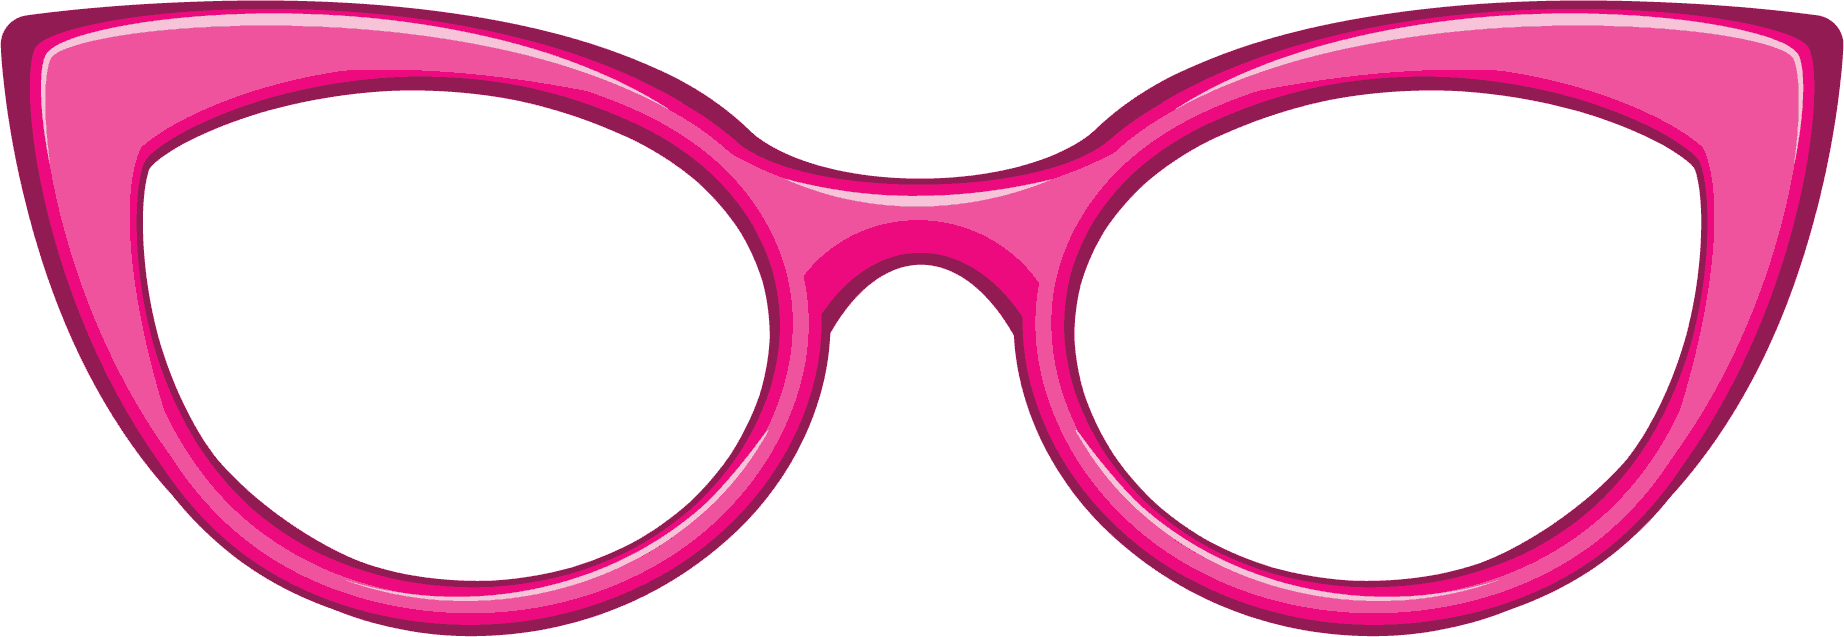 Glasses Eye Booth Cat PNG Image High Quality Clipart